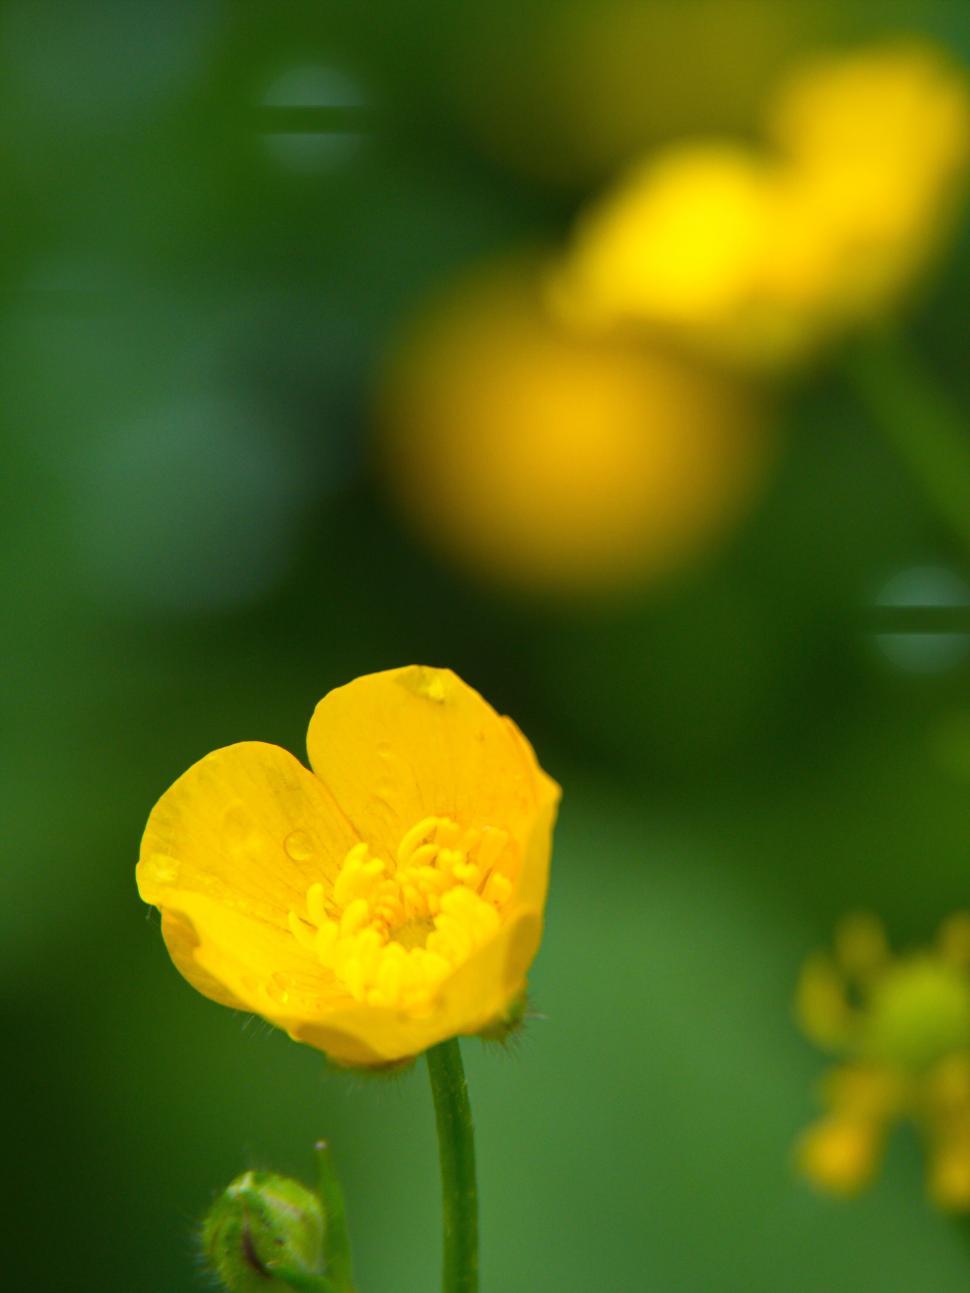 Free Image of Yellow buttercup flower with blurred background 